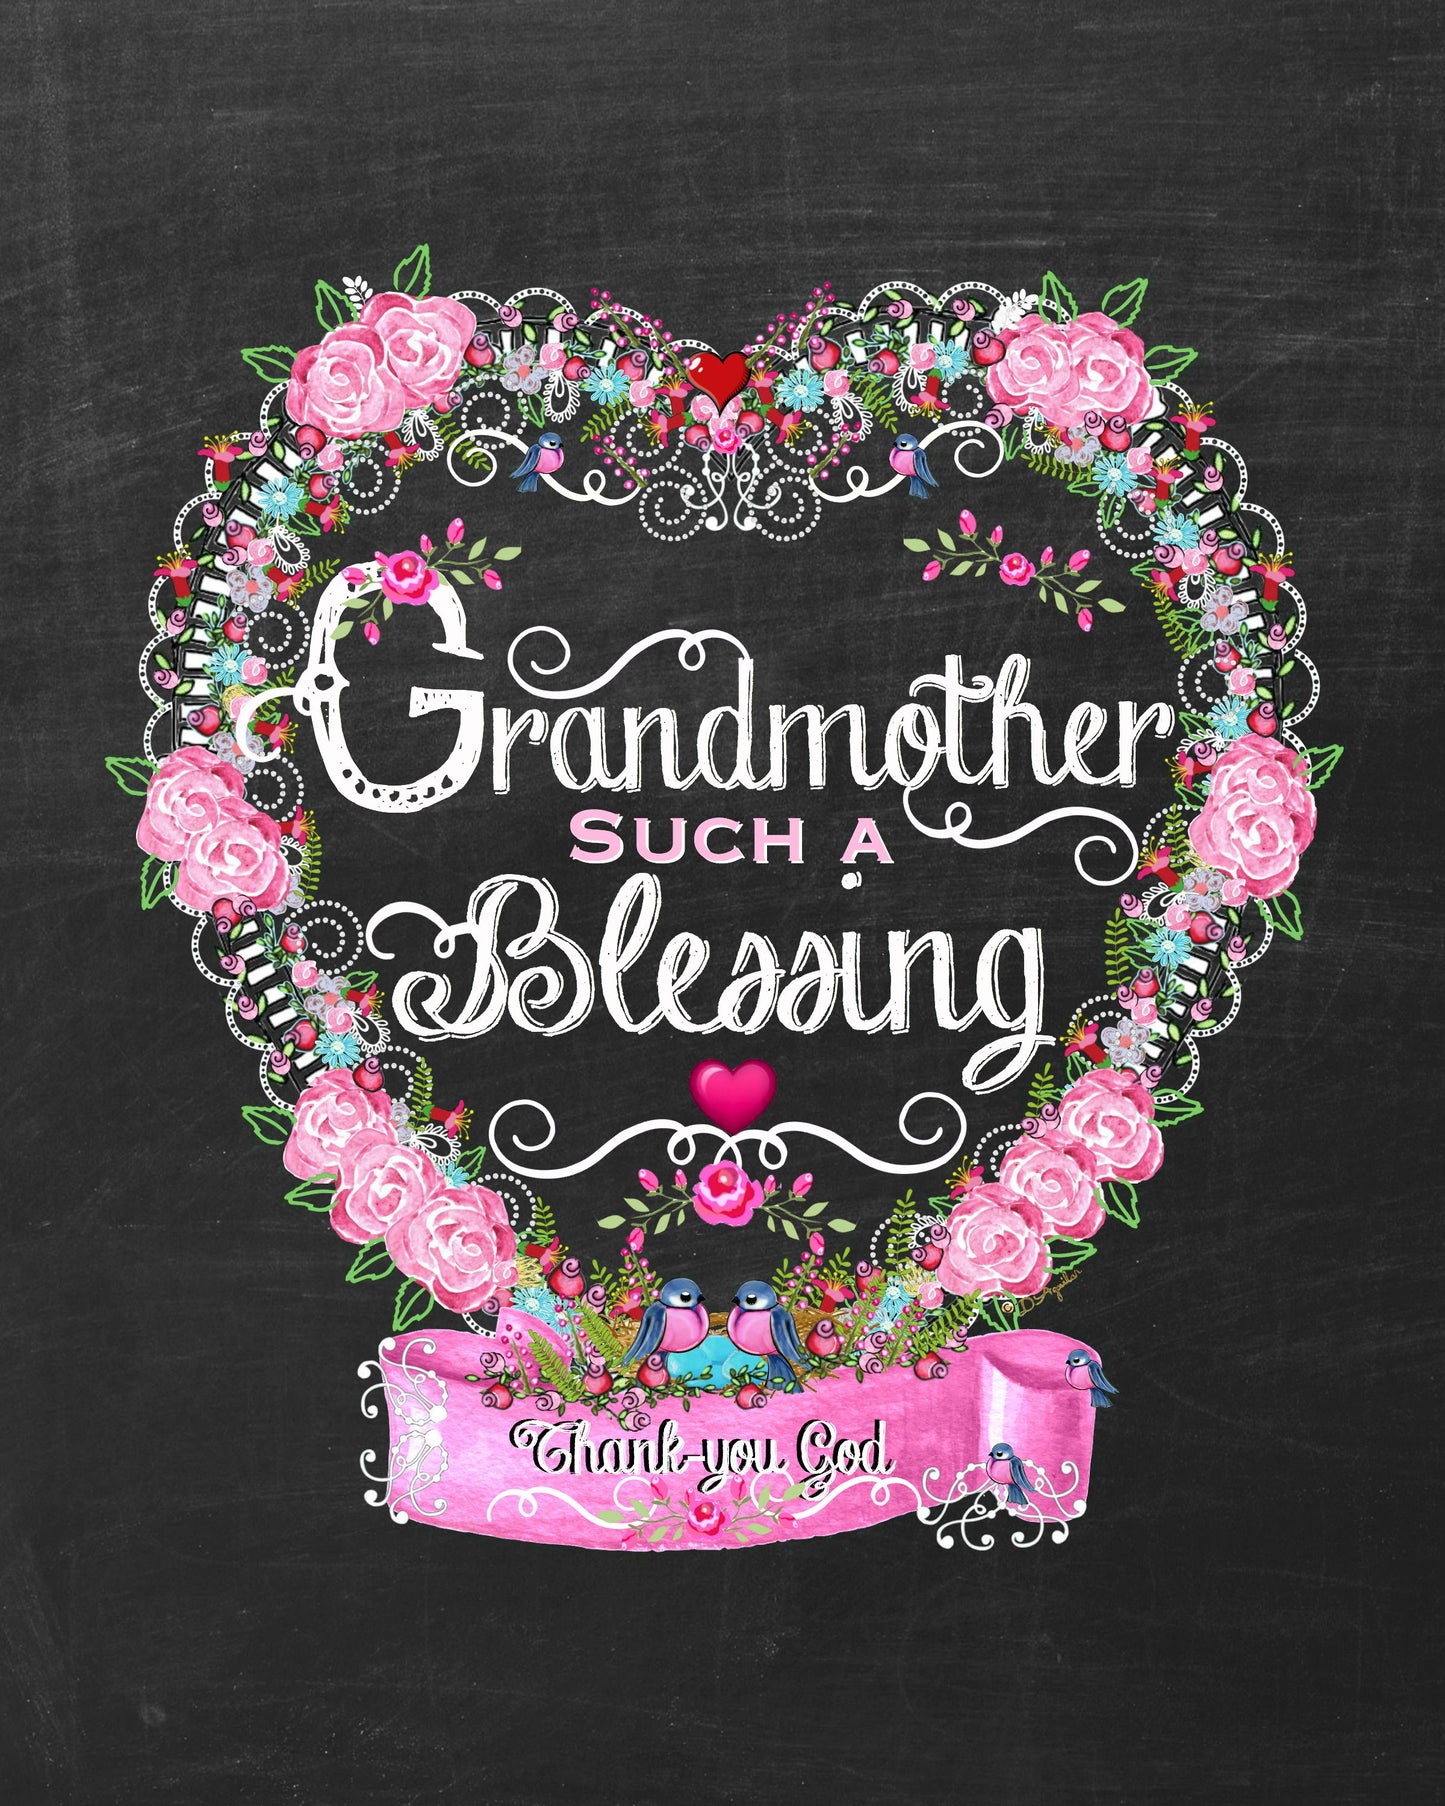 Grandmother such a Blessing Love Heart  8x10 Print Ready to Frame is part of a collection of matching prints